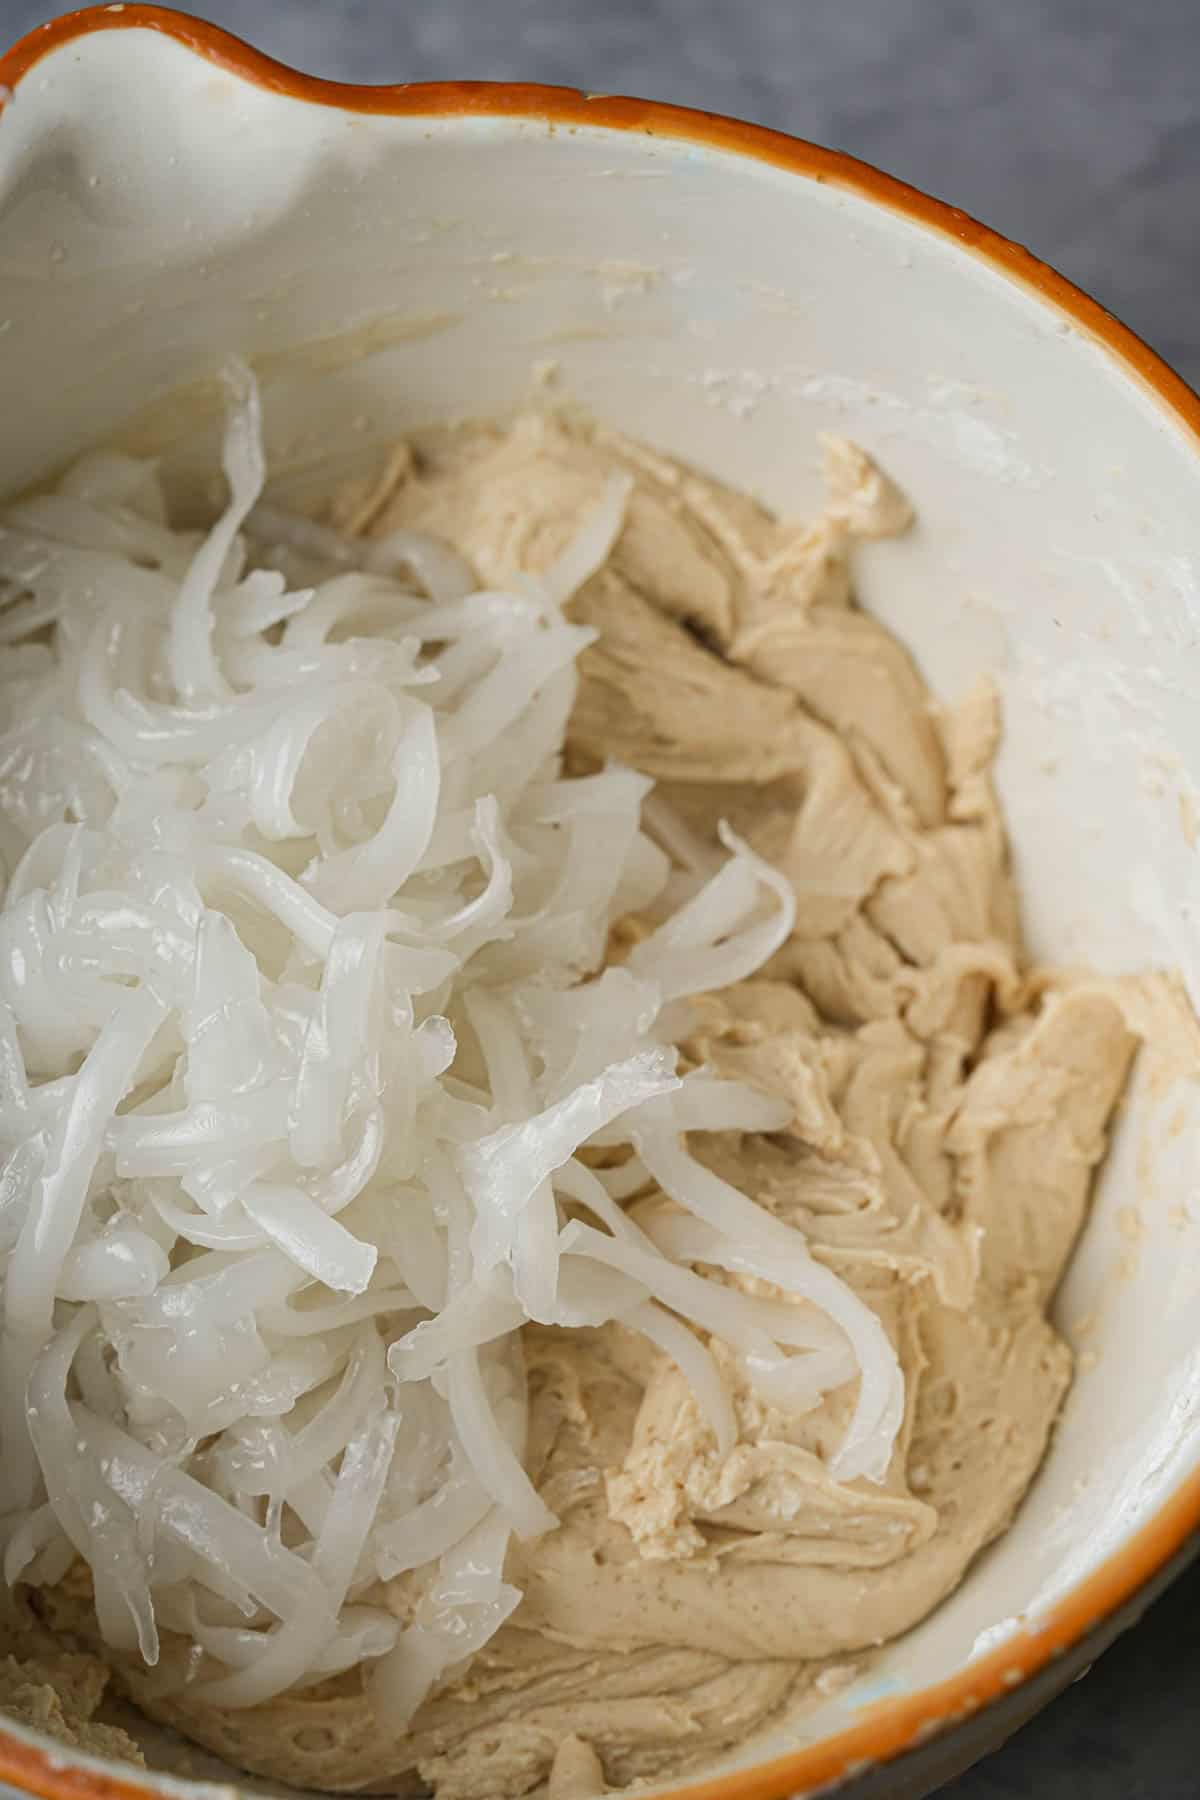 A bowl filled with coconut threads and sweet rice batter.